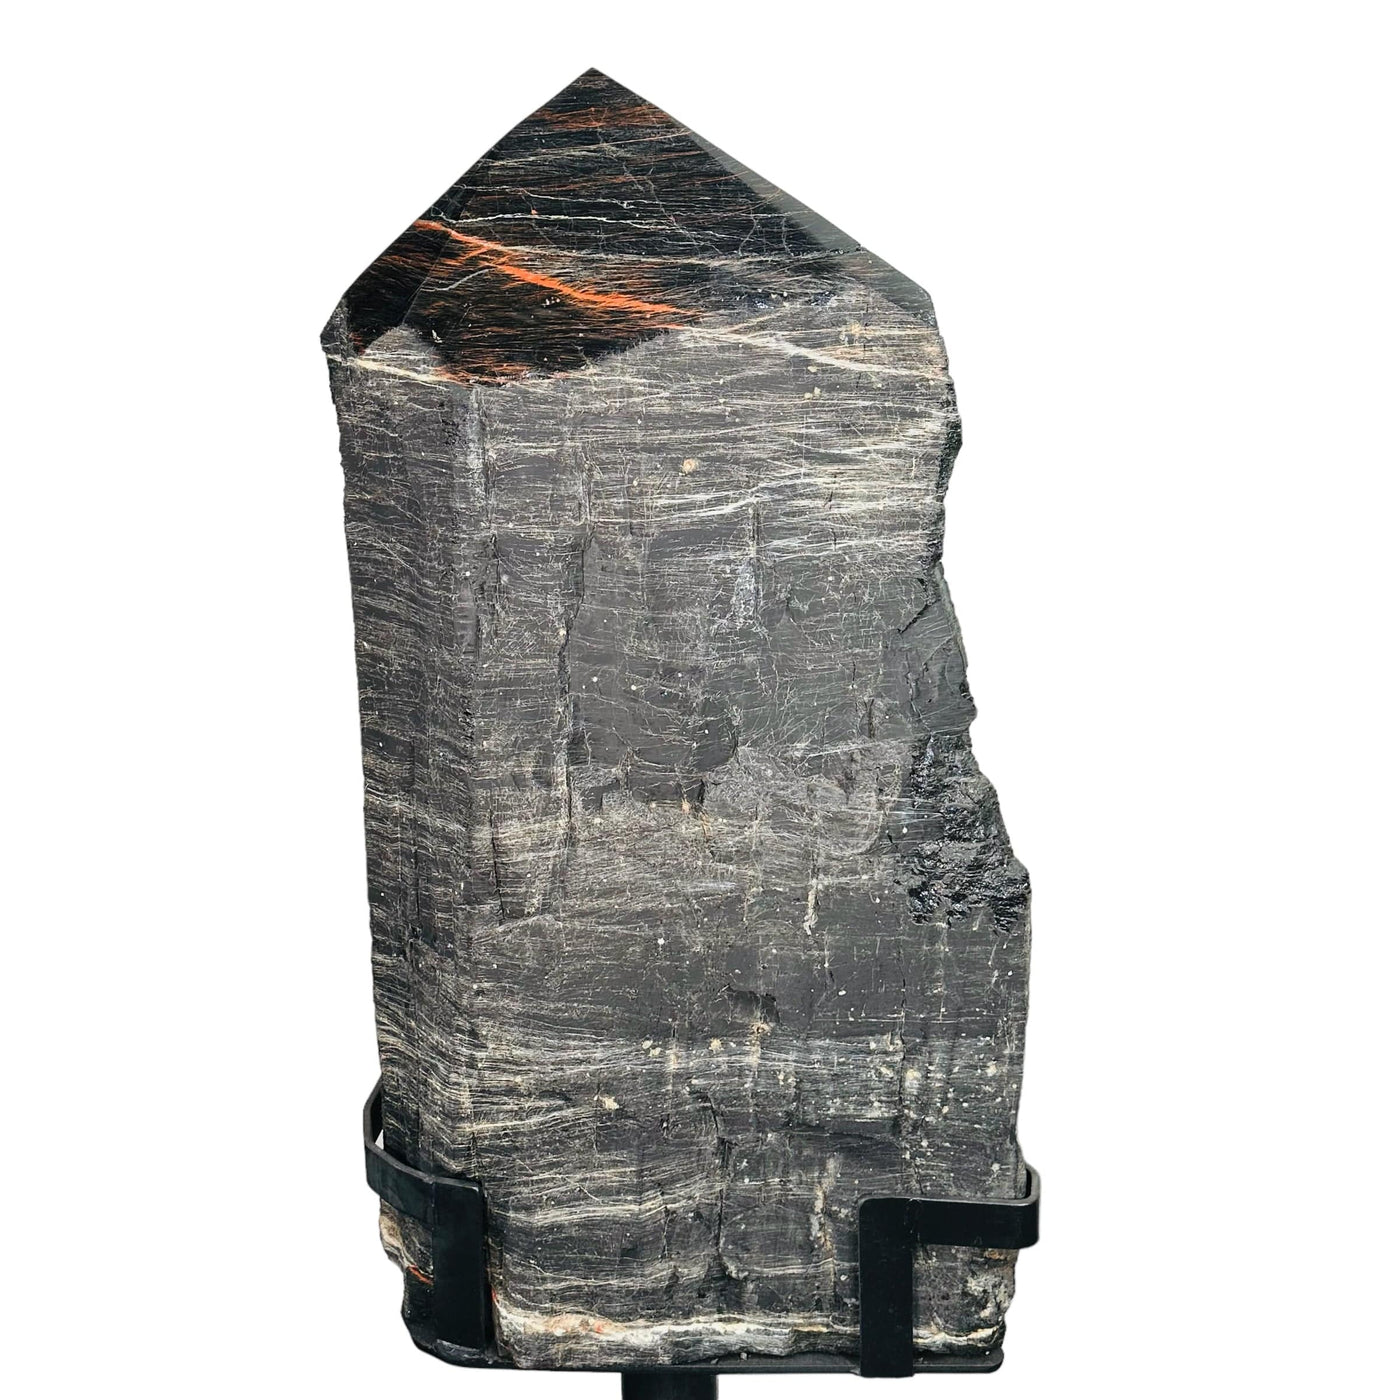 close up of large black tourmaline on stand.